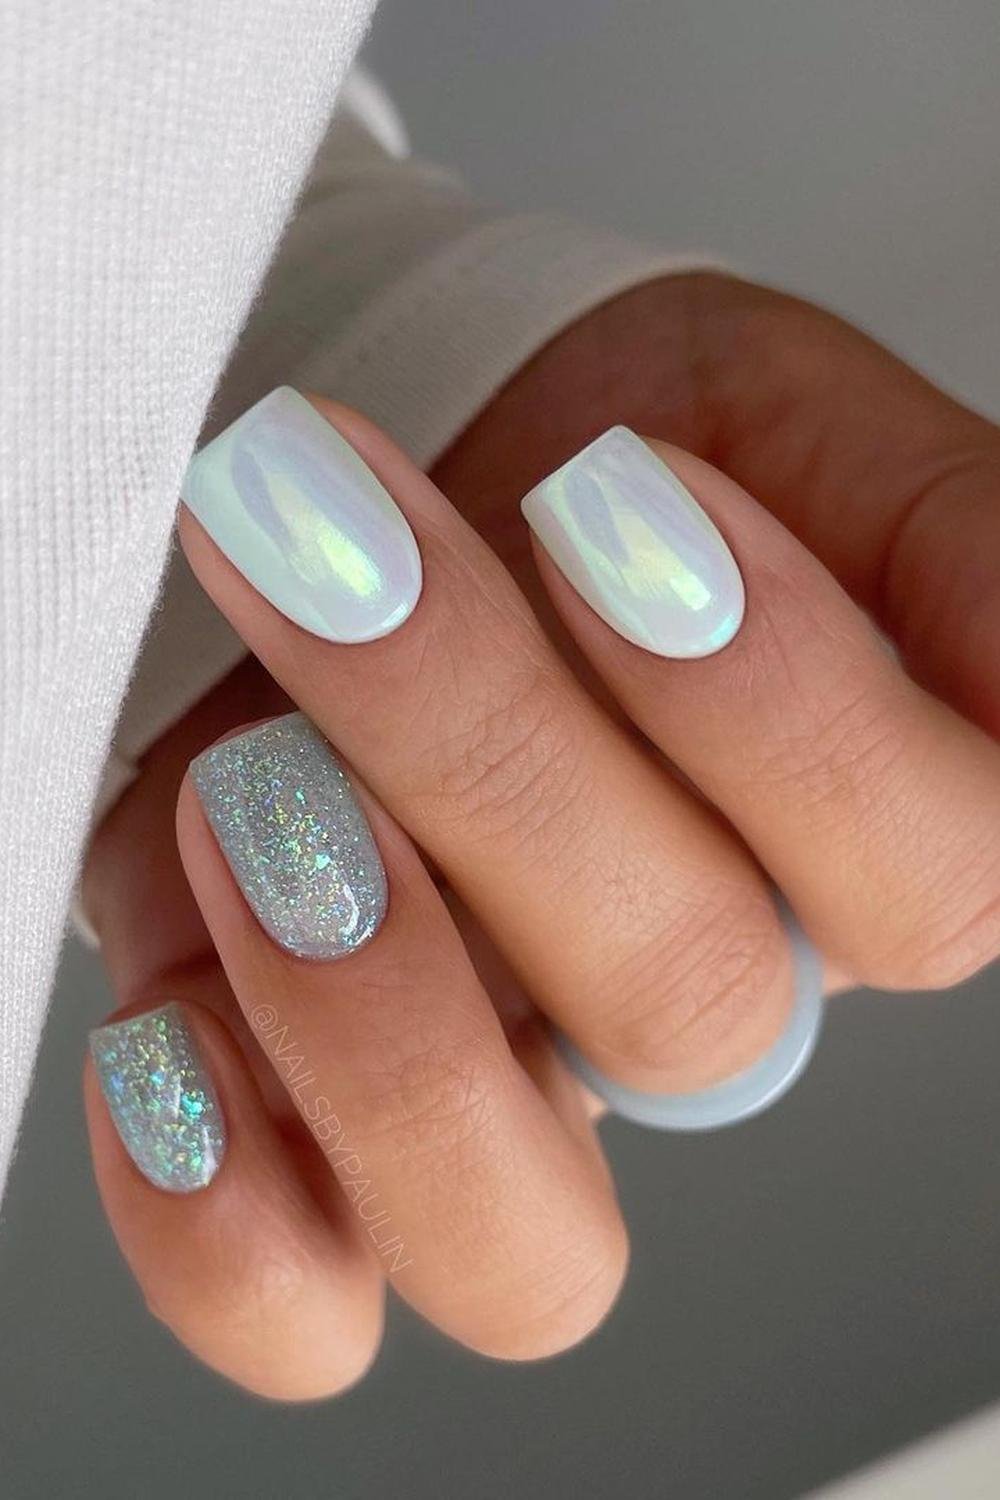 24 - Picture of Mermaid Nails